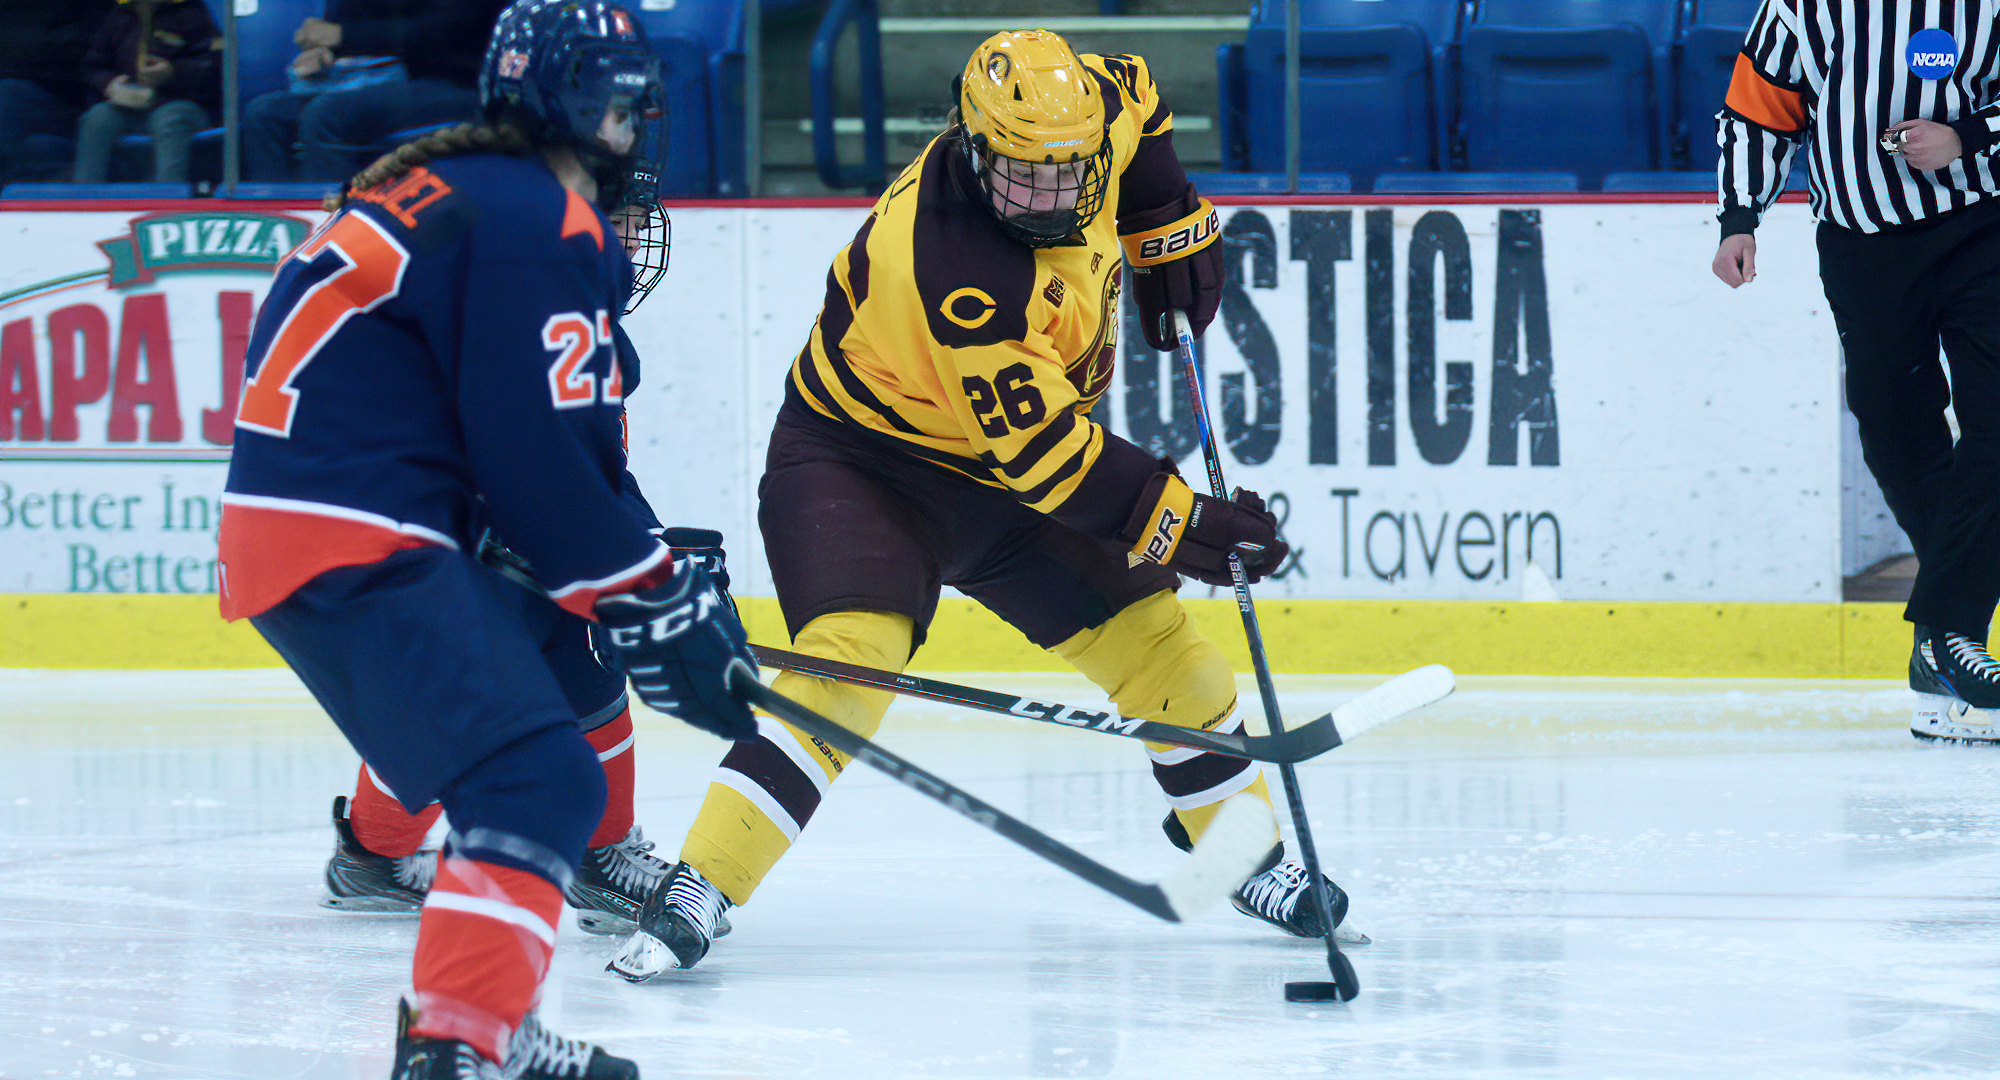 Junior Josie Hell scored the Cobbers' first goal in their series opener at St. Catherine. It was Hell's first tally of the season and sixth of her career.